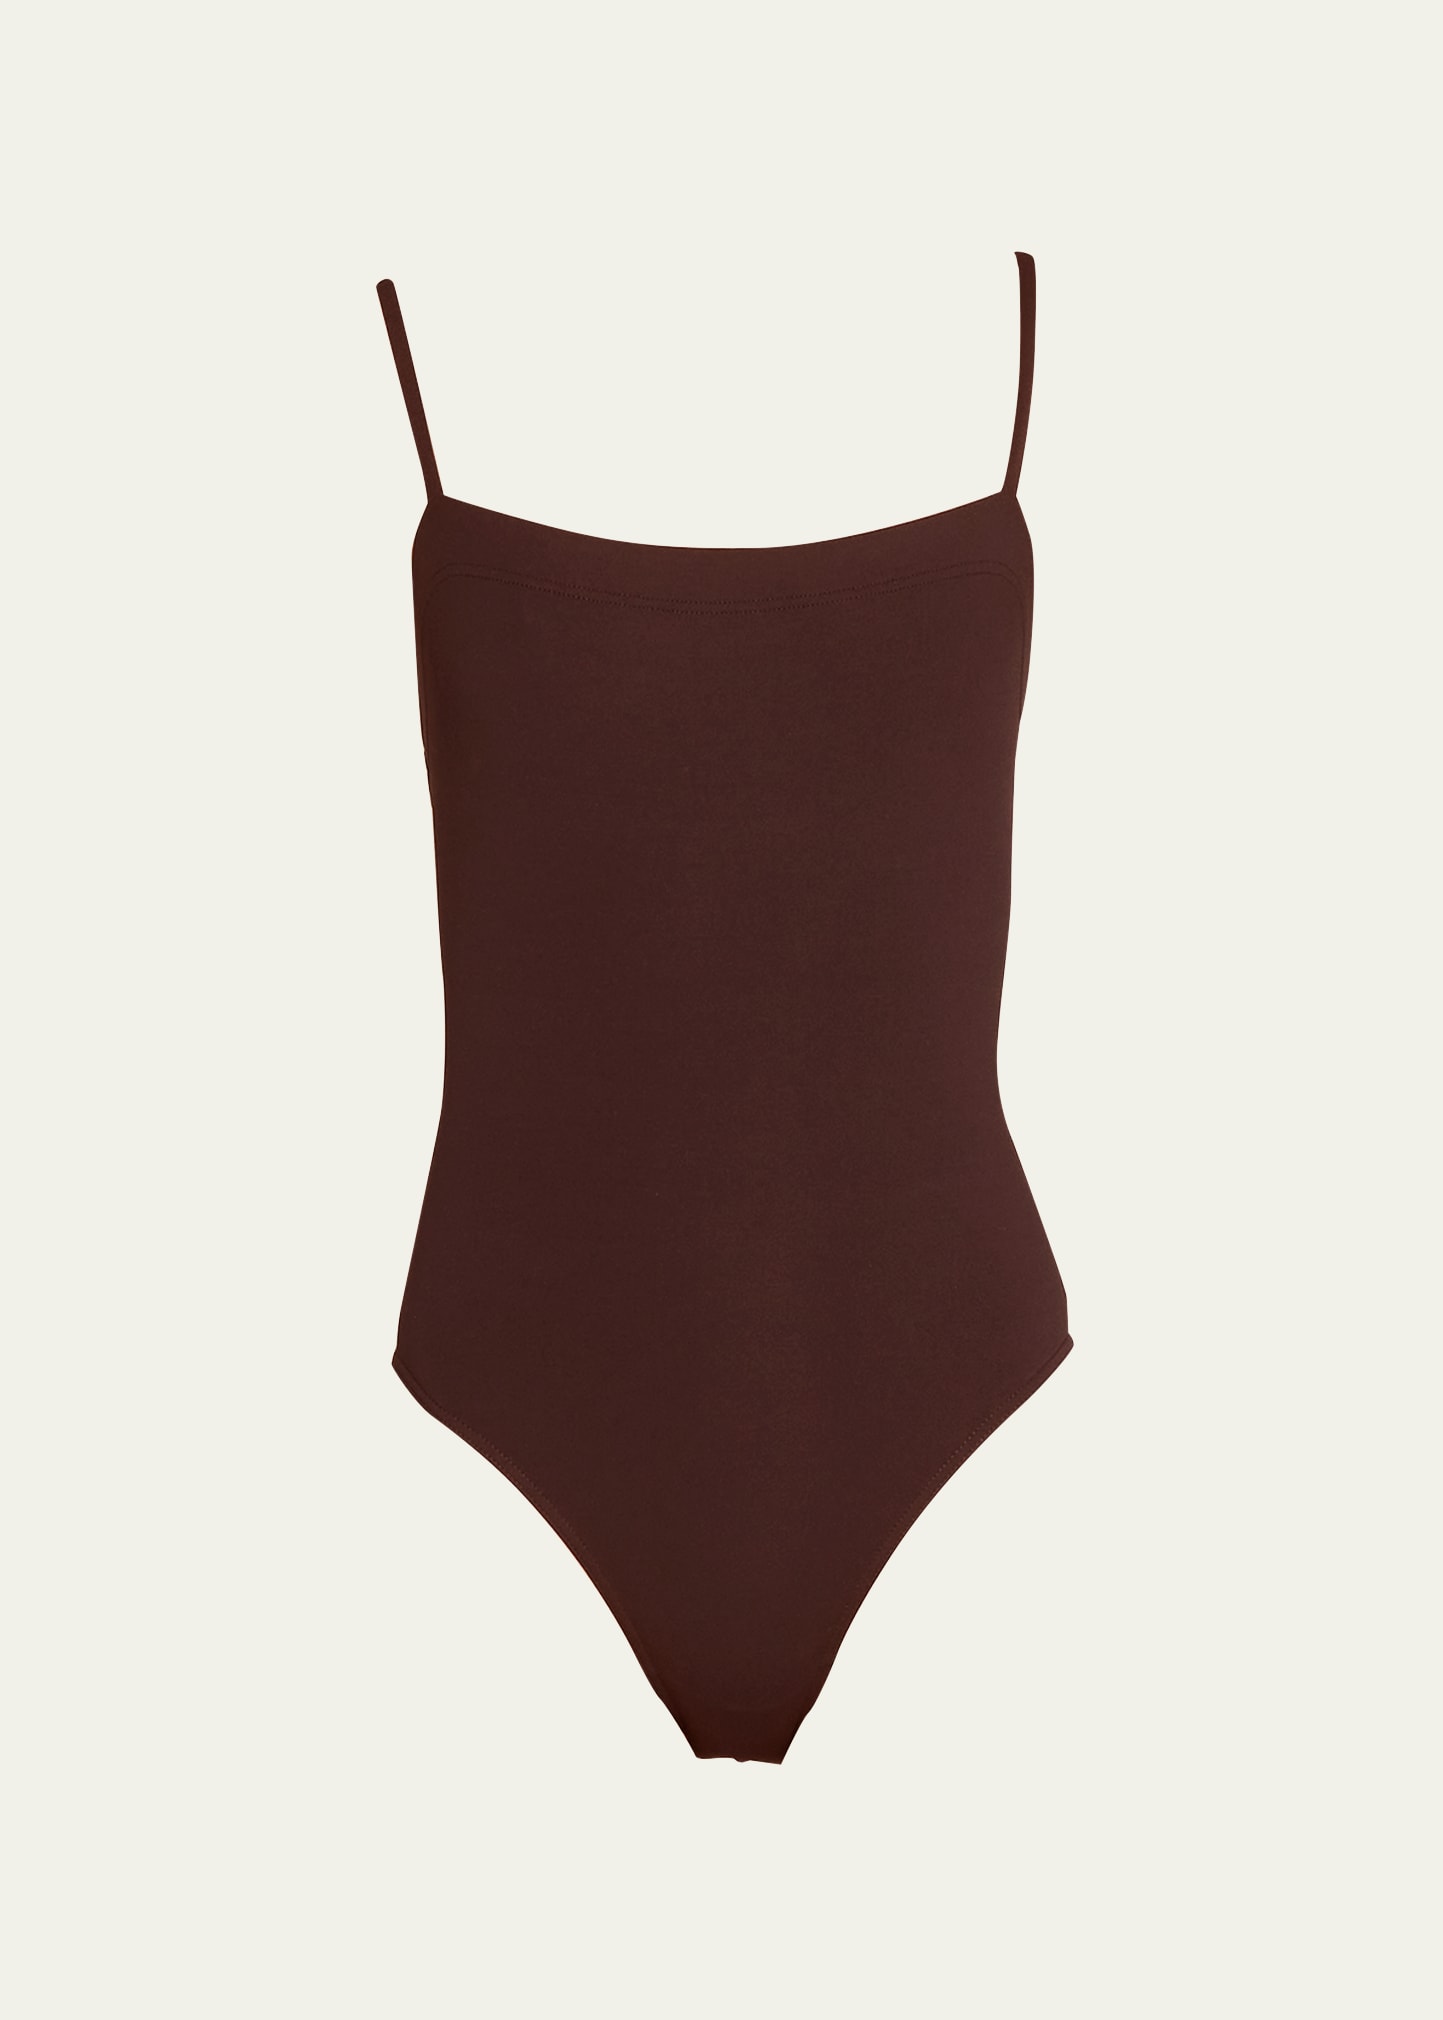 Aquarelle One-Piece Swimsuit with Thin Straps